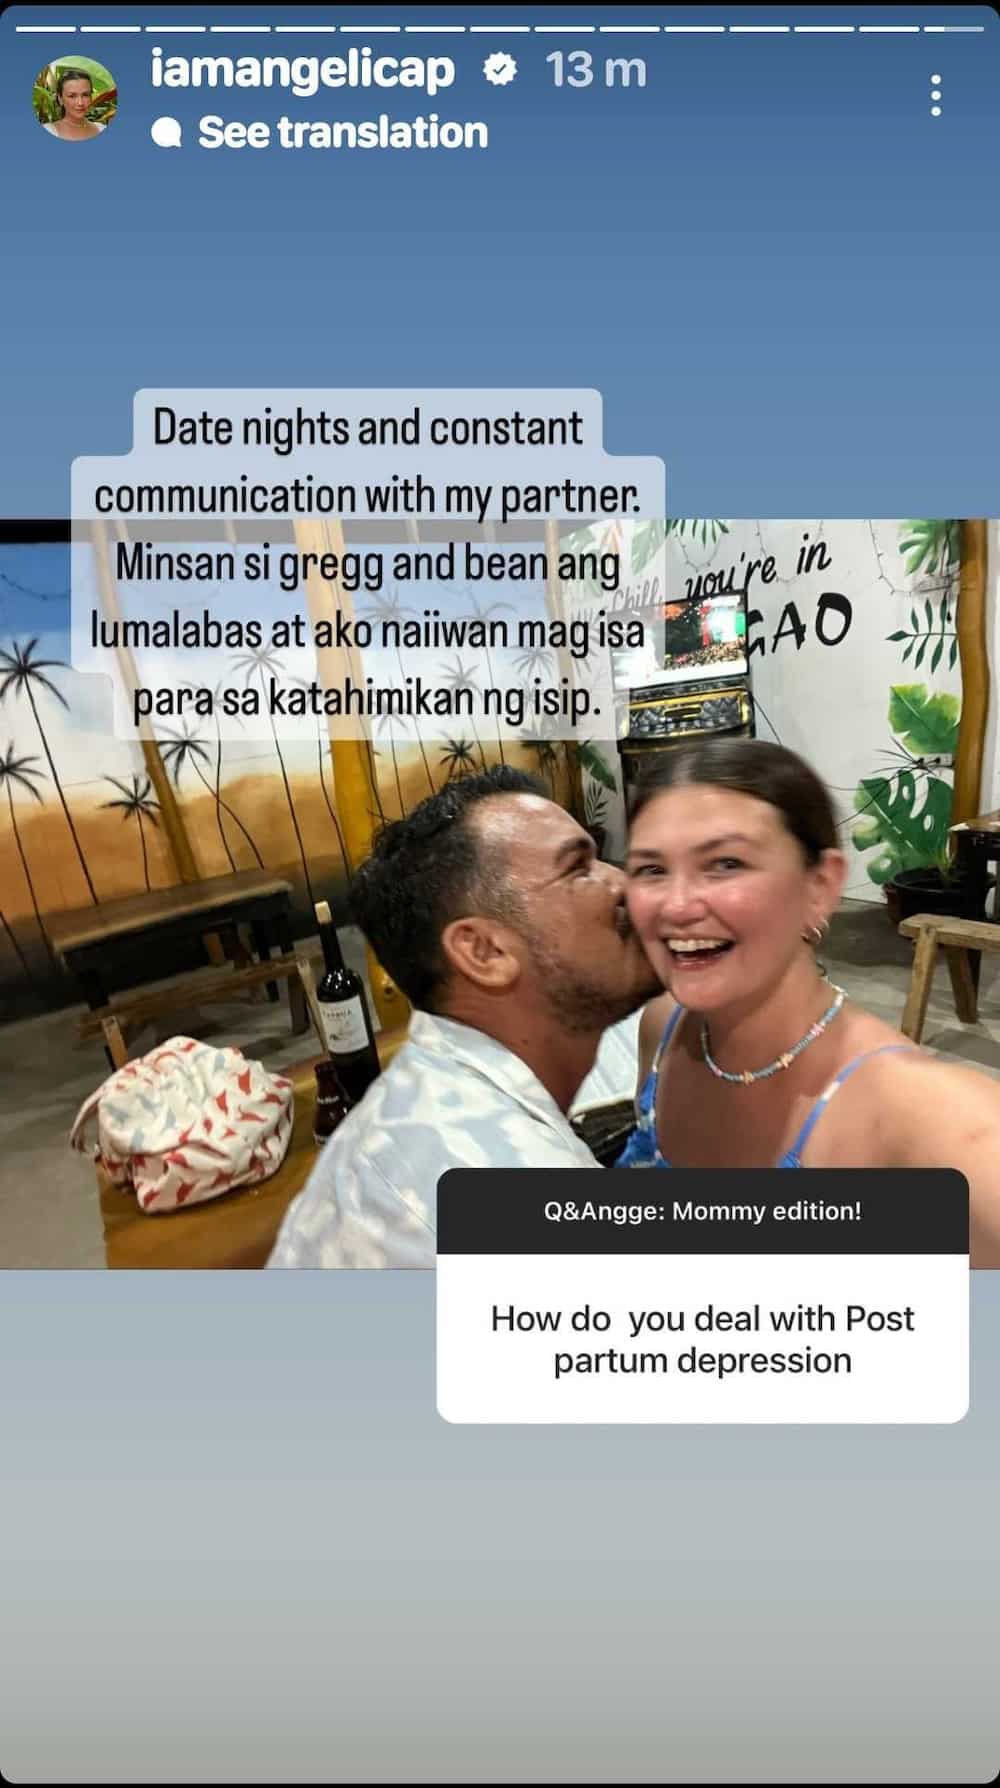 Angelica Panganiban shares how she deals with postpartum depression: “constant communication”